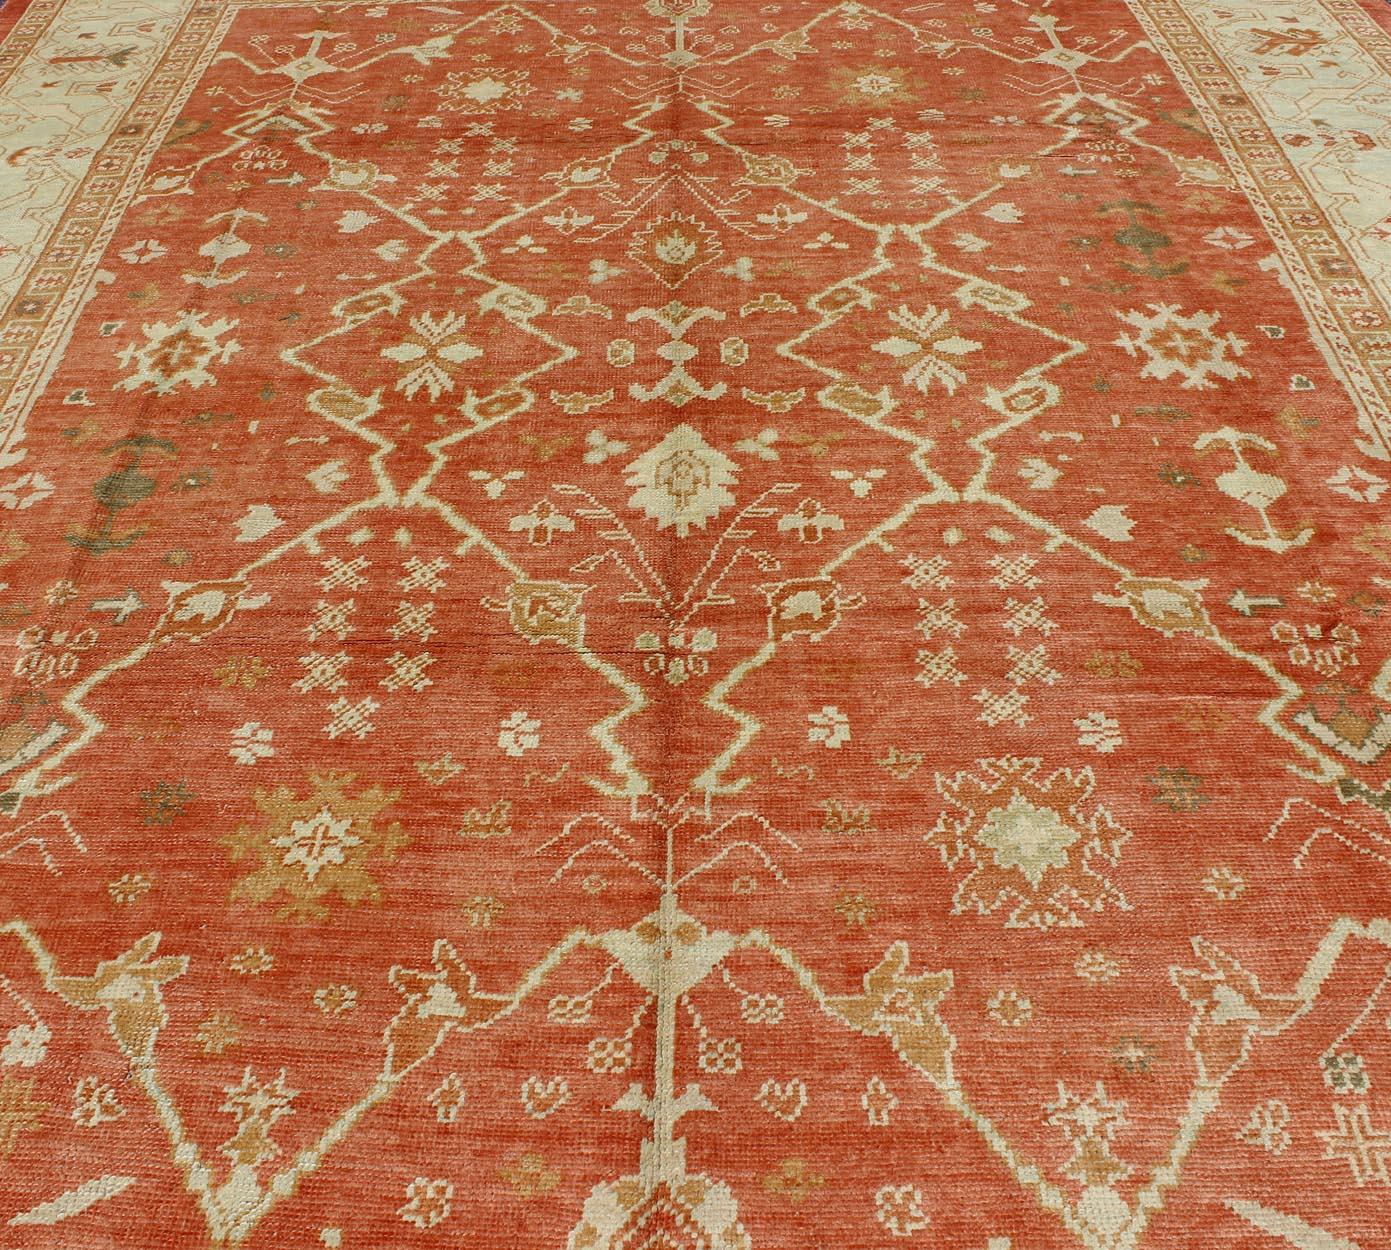 Contemporary Turkish Oushak Rug with Angora Wool in Rust Orange, Green and Cream Tones For Sale